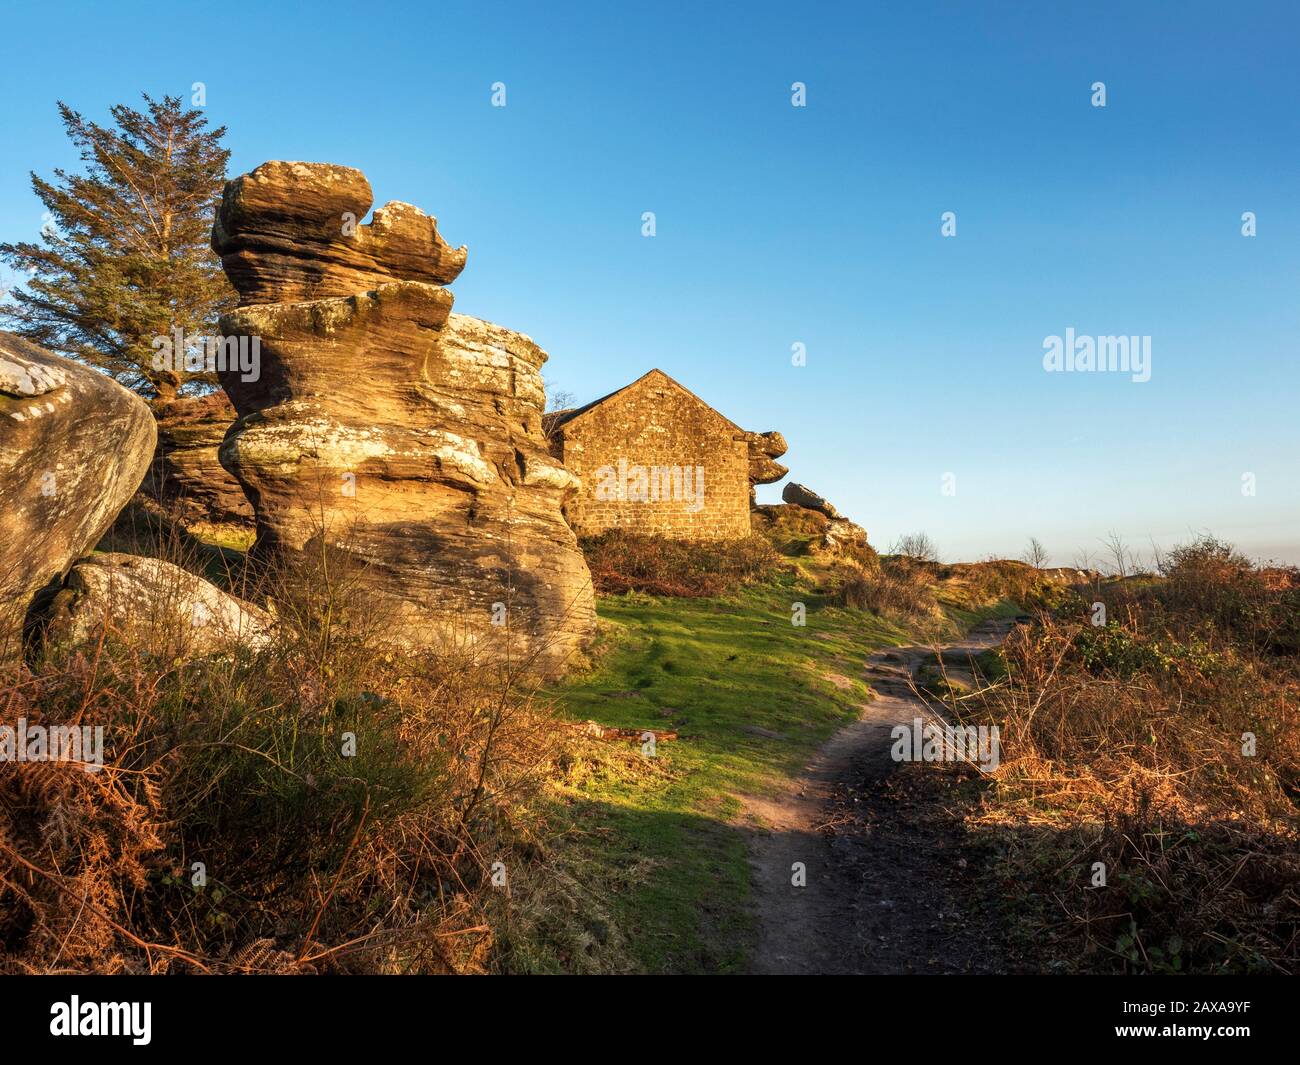 The Dancing Bear gritstone rock formation and Visitor Centre at Brimham Rocks Brimham Moor Nidderdale AONB North Yorkshire England Stock Photo